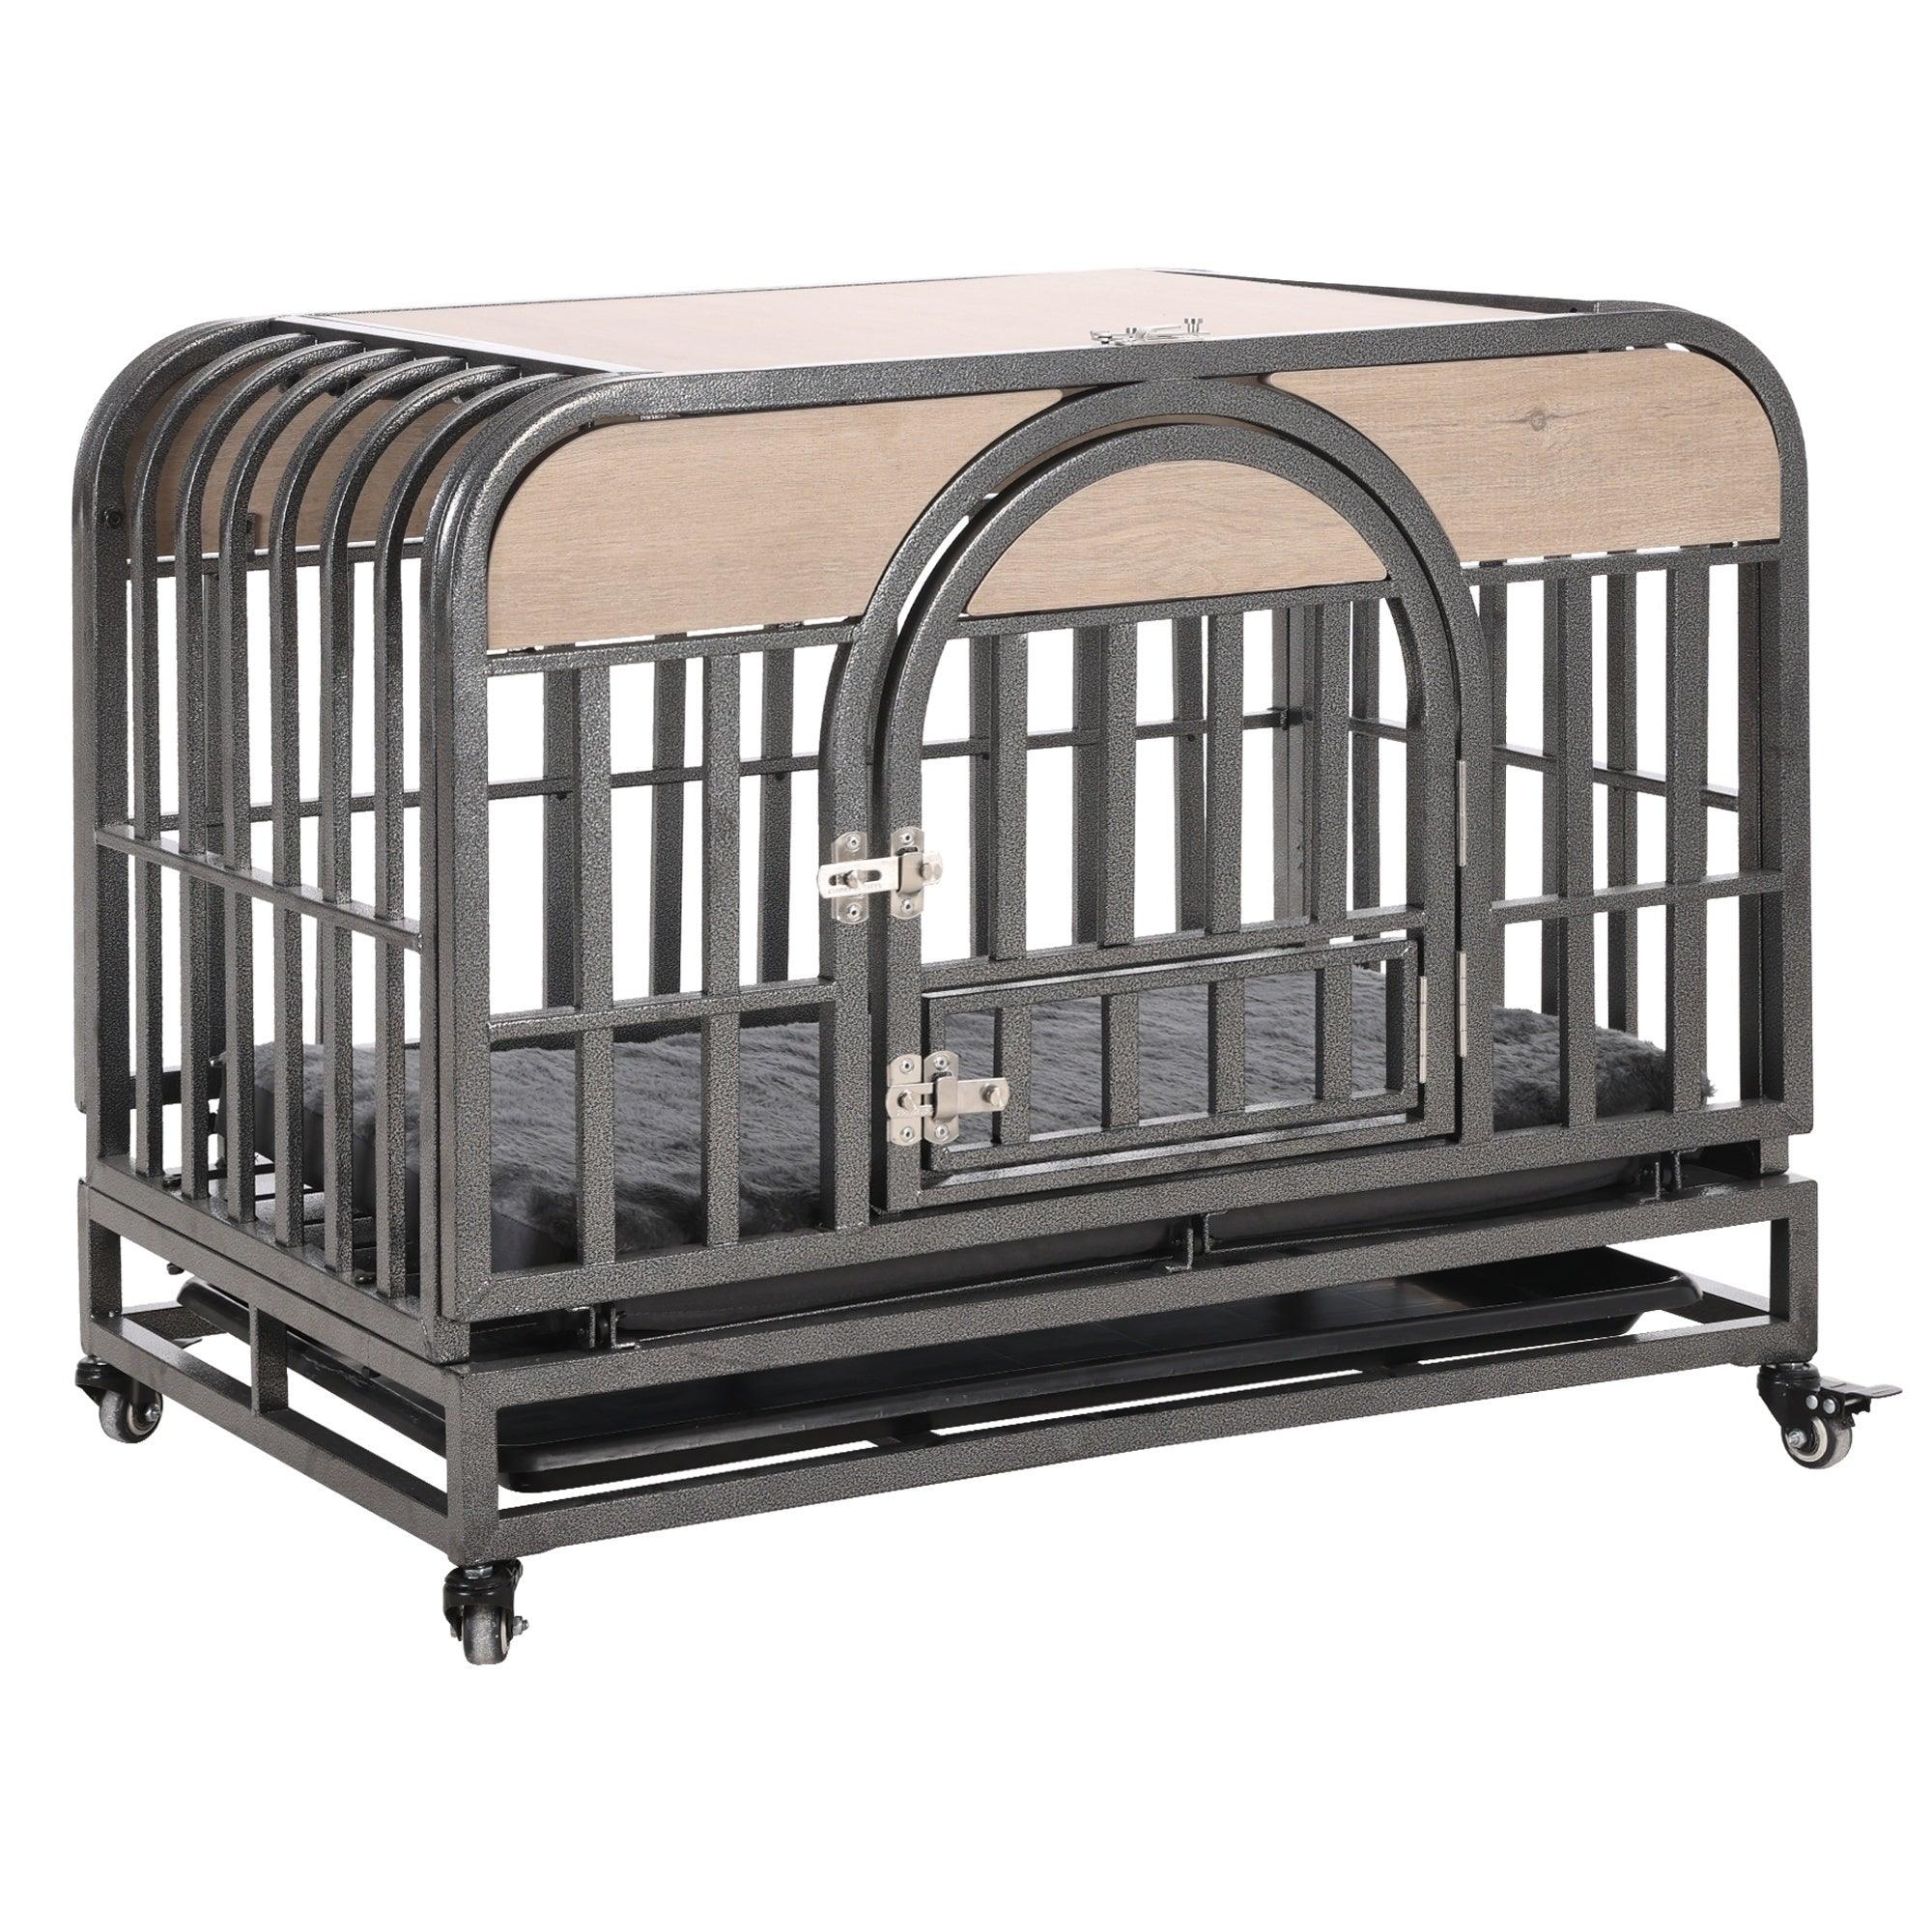 🆓🚛 37" Heavy Duty Dog Crate, Furniture Style Dog Crate With Removable Trays and Wheels for High Anxiety Dogs, Beige